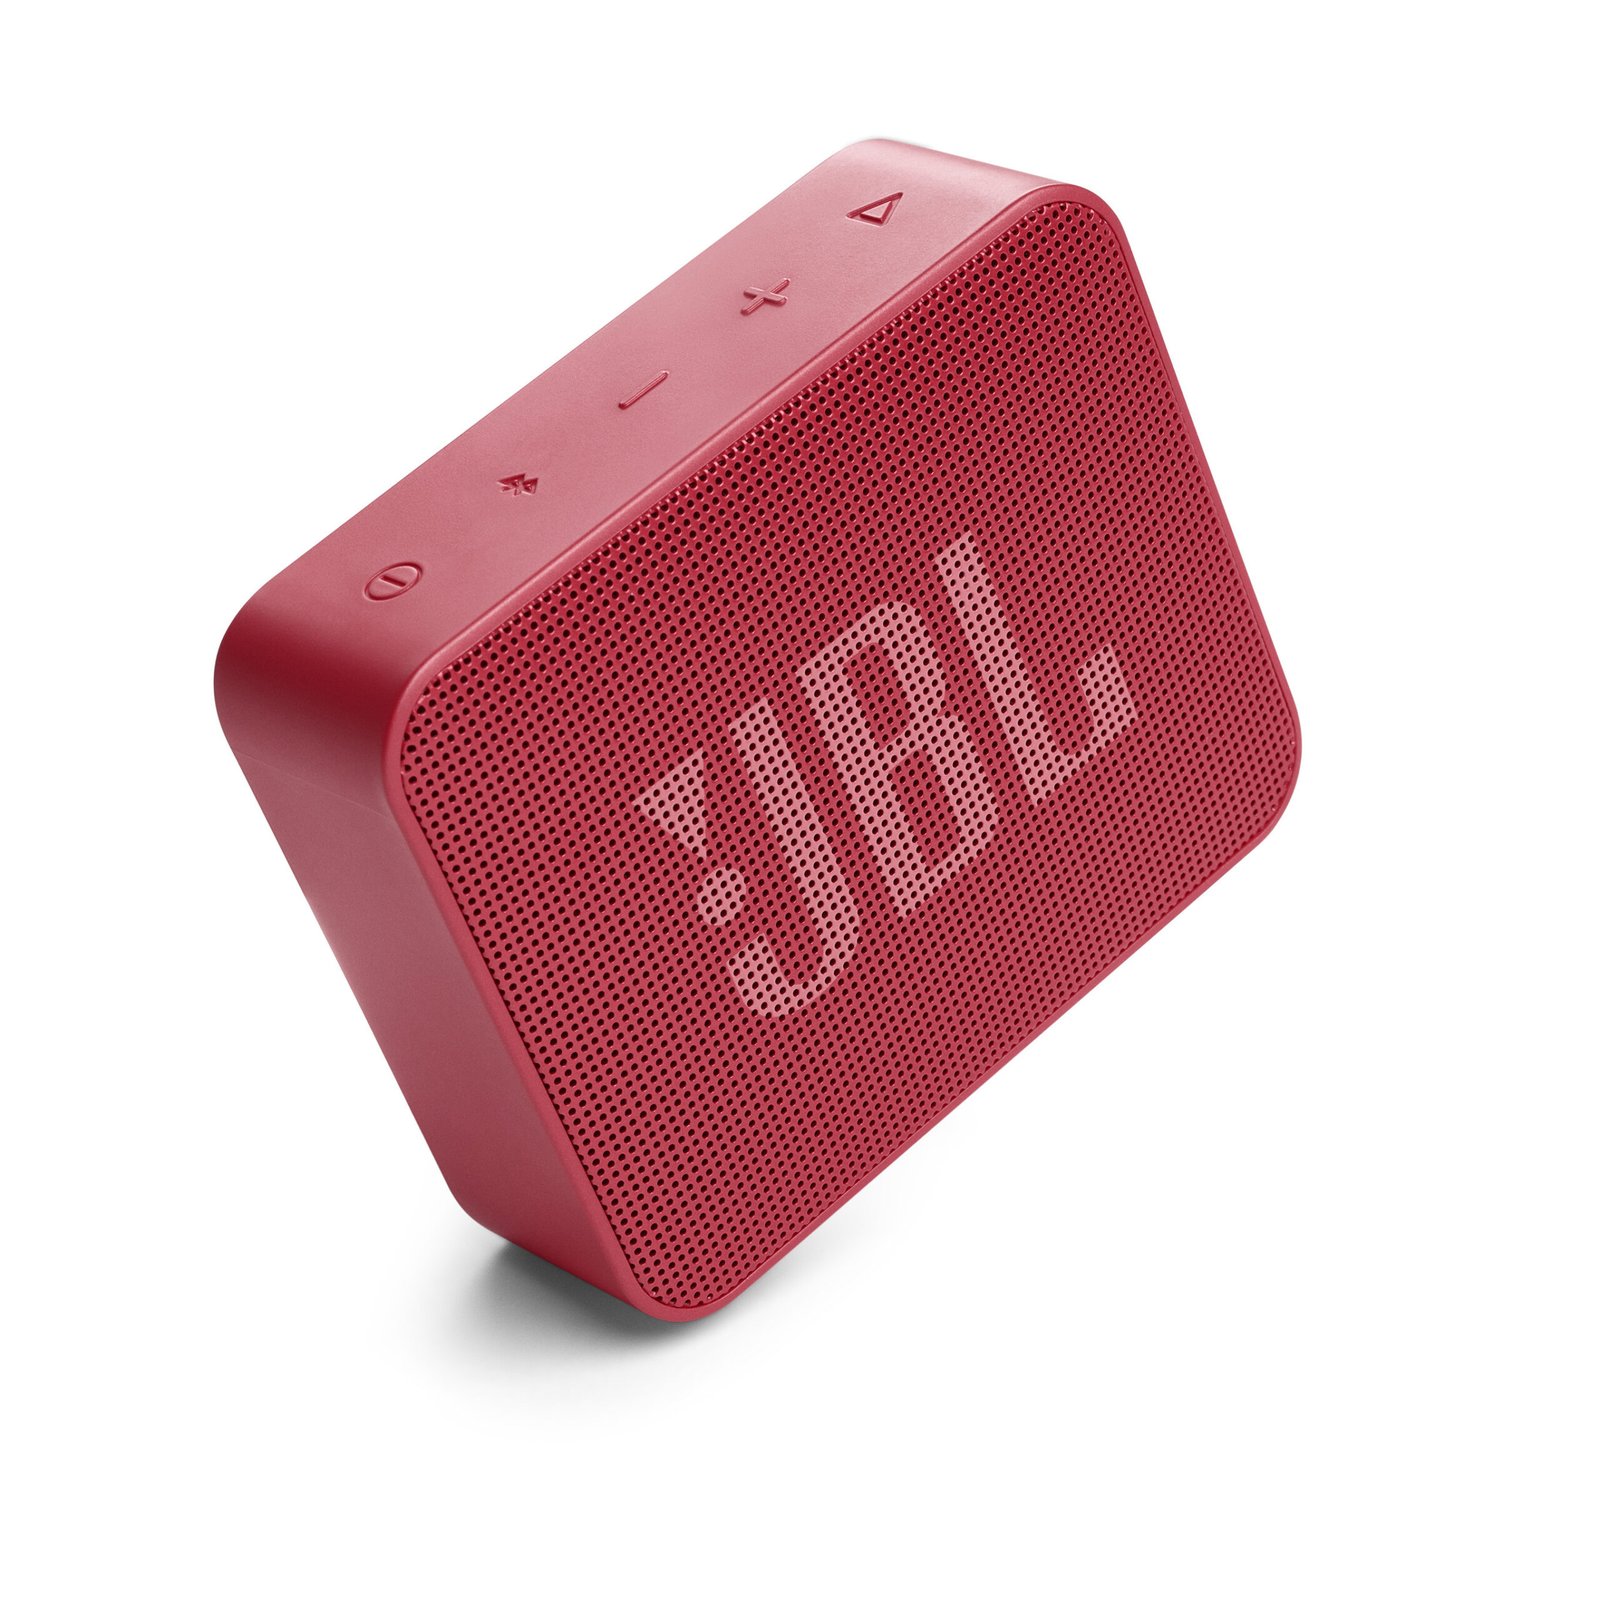 JBL GO Bluetooth Portable Speaker, Price from Rs.1799/unit onwards